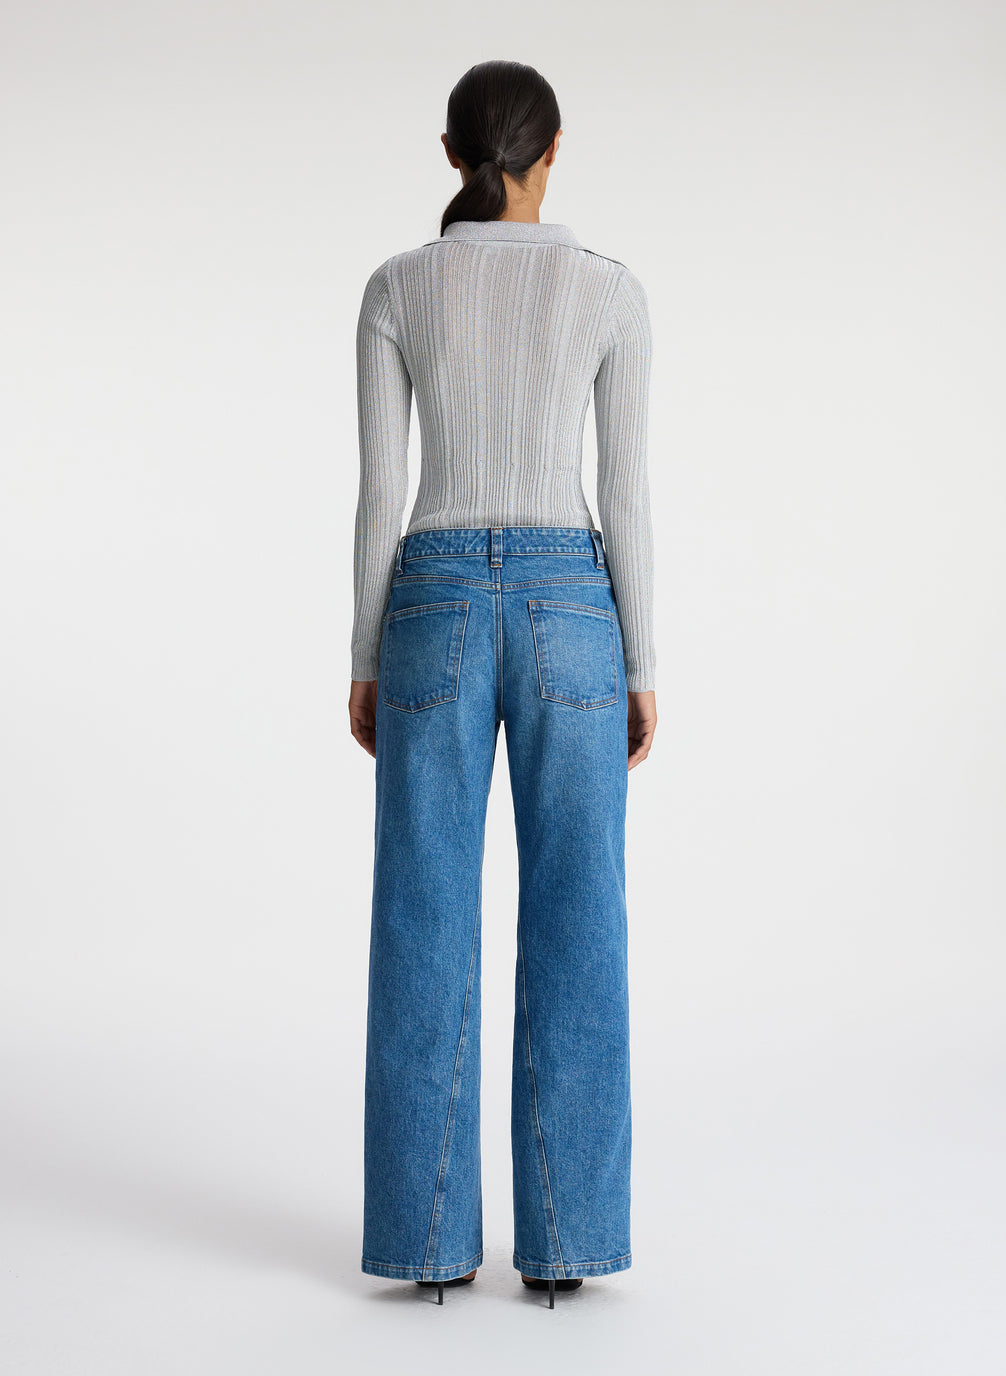 back view of woman in silver long sleeve top and medium blue wash jeans